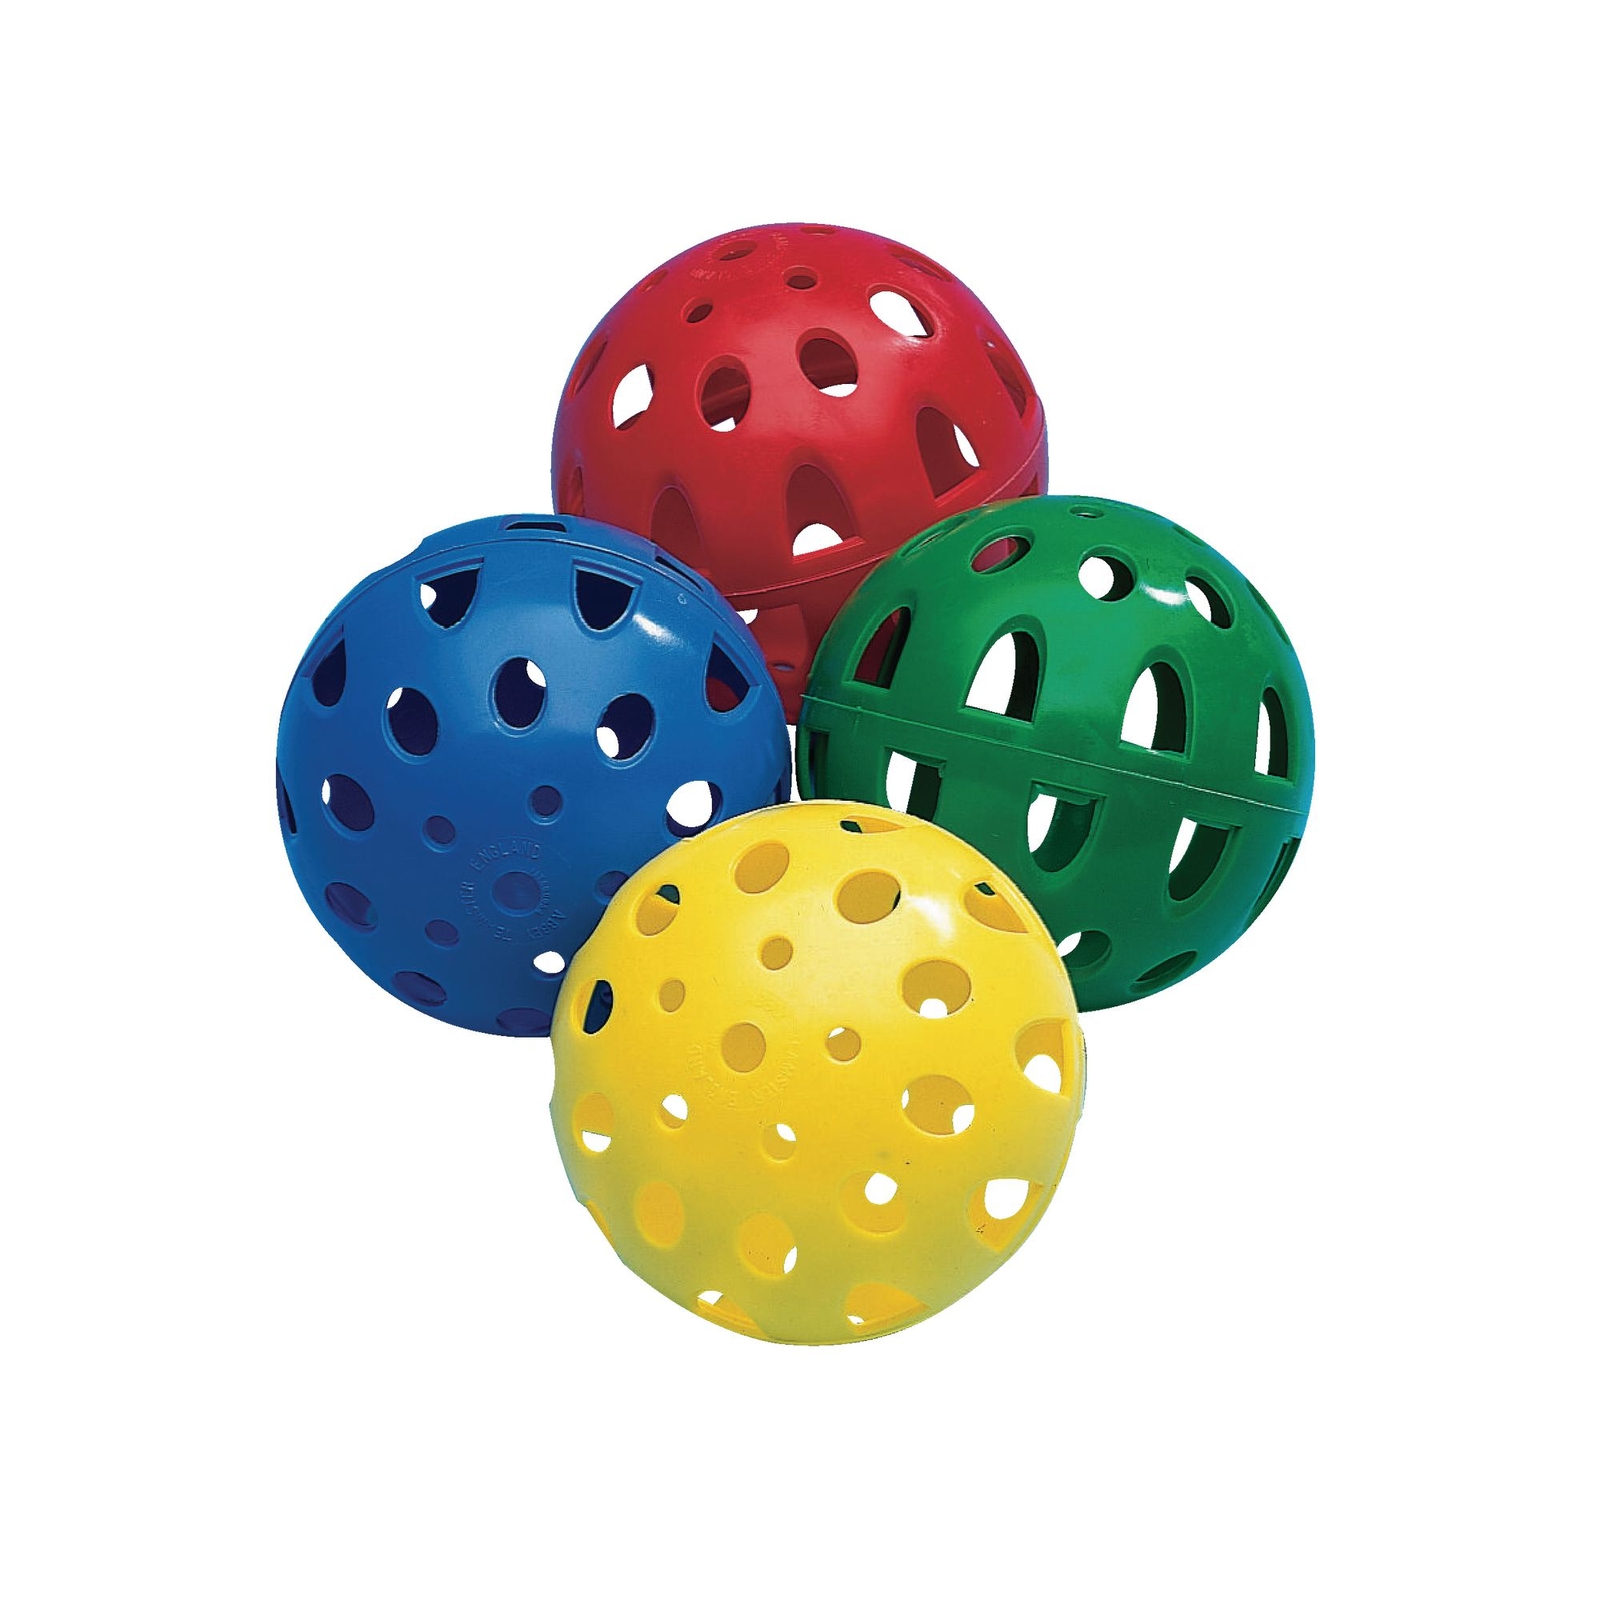 Teamster Perforated Balls - Pack of 12